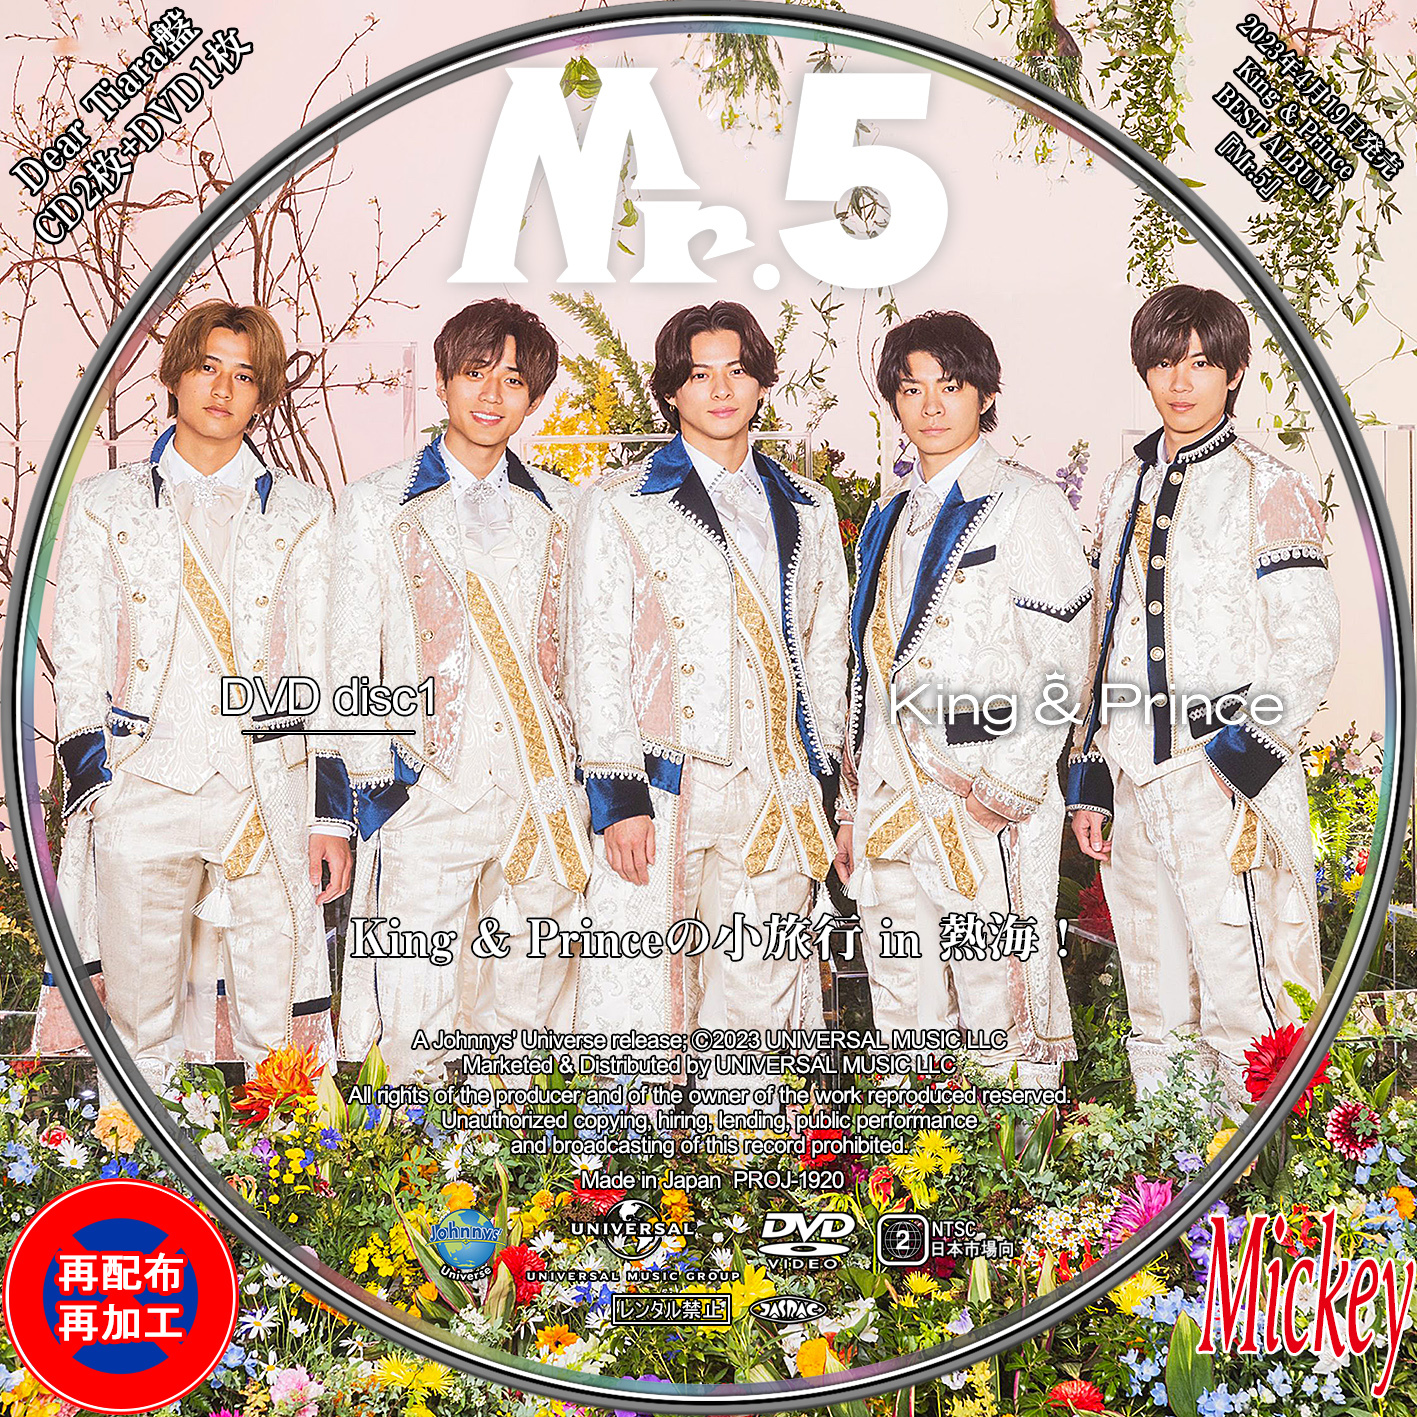 King & Prince『Mr.5』Dear Tiara盤（2CD+DVD） : Mickey's Request Label Collection